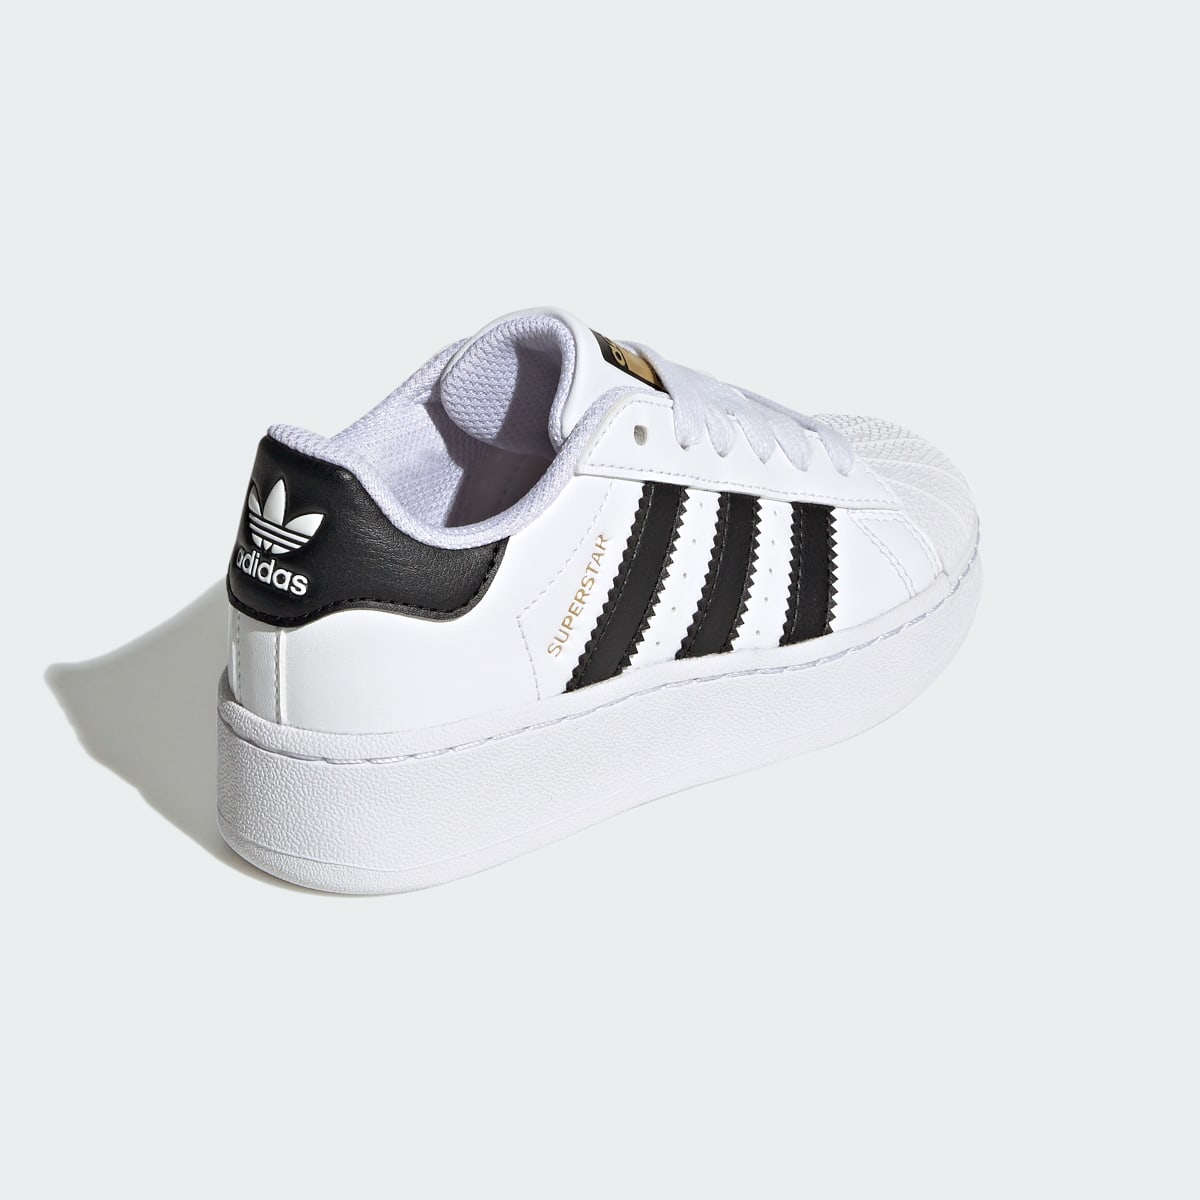 Adidas Superstar XLG Shoes Kids. 6